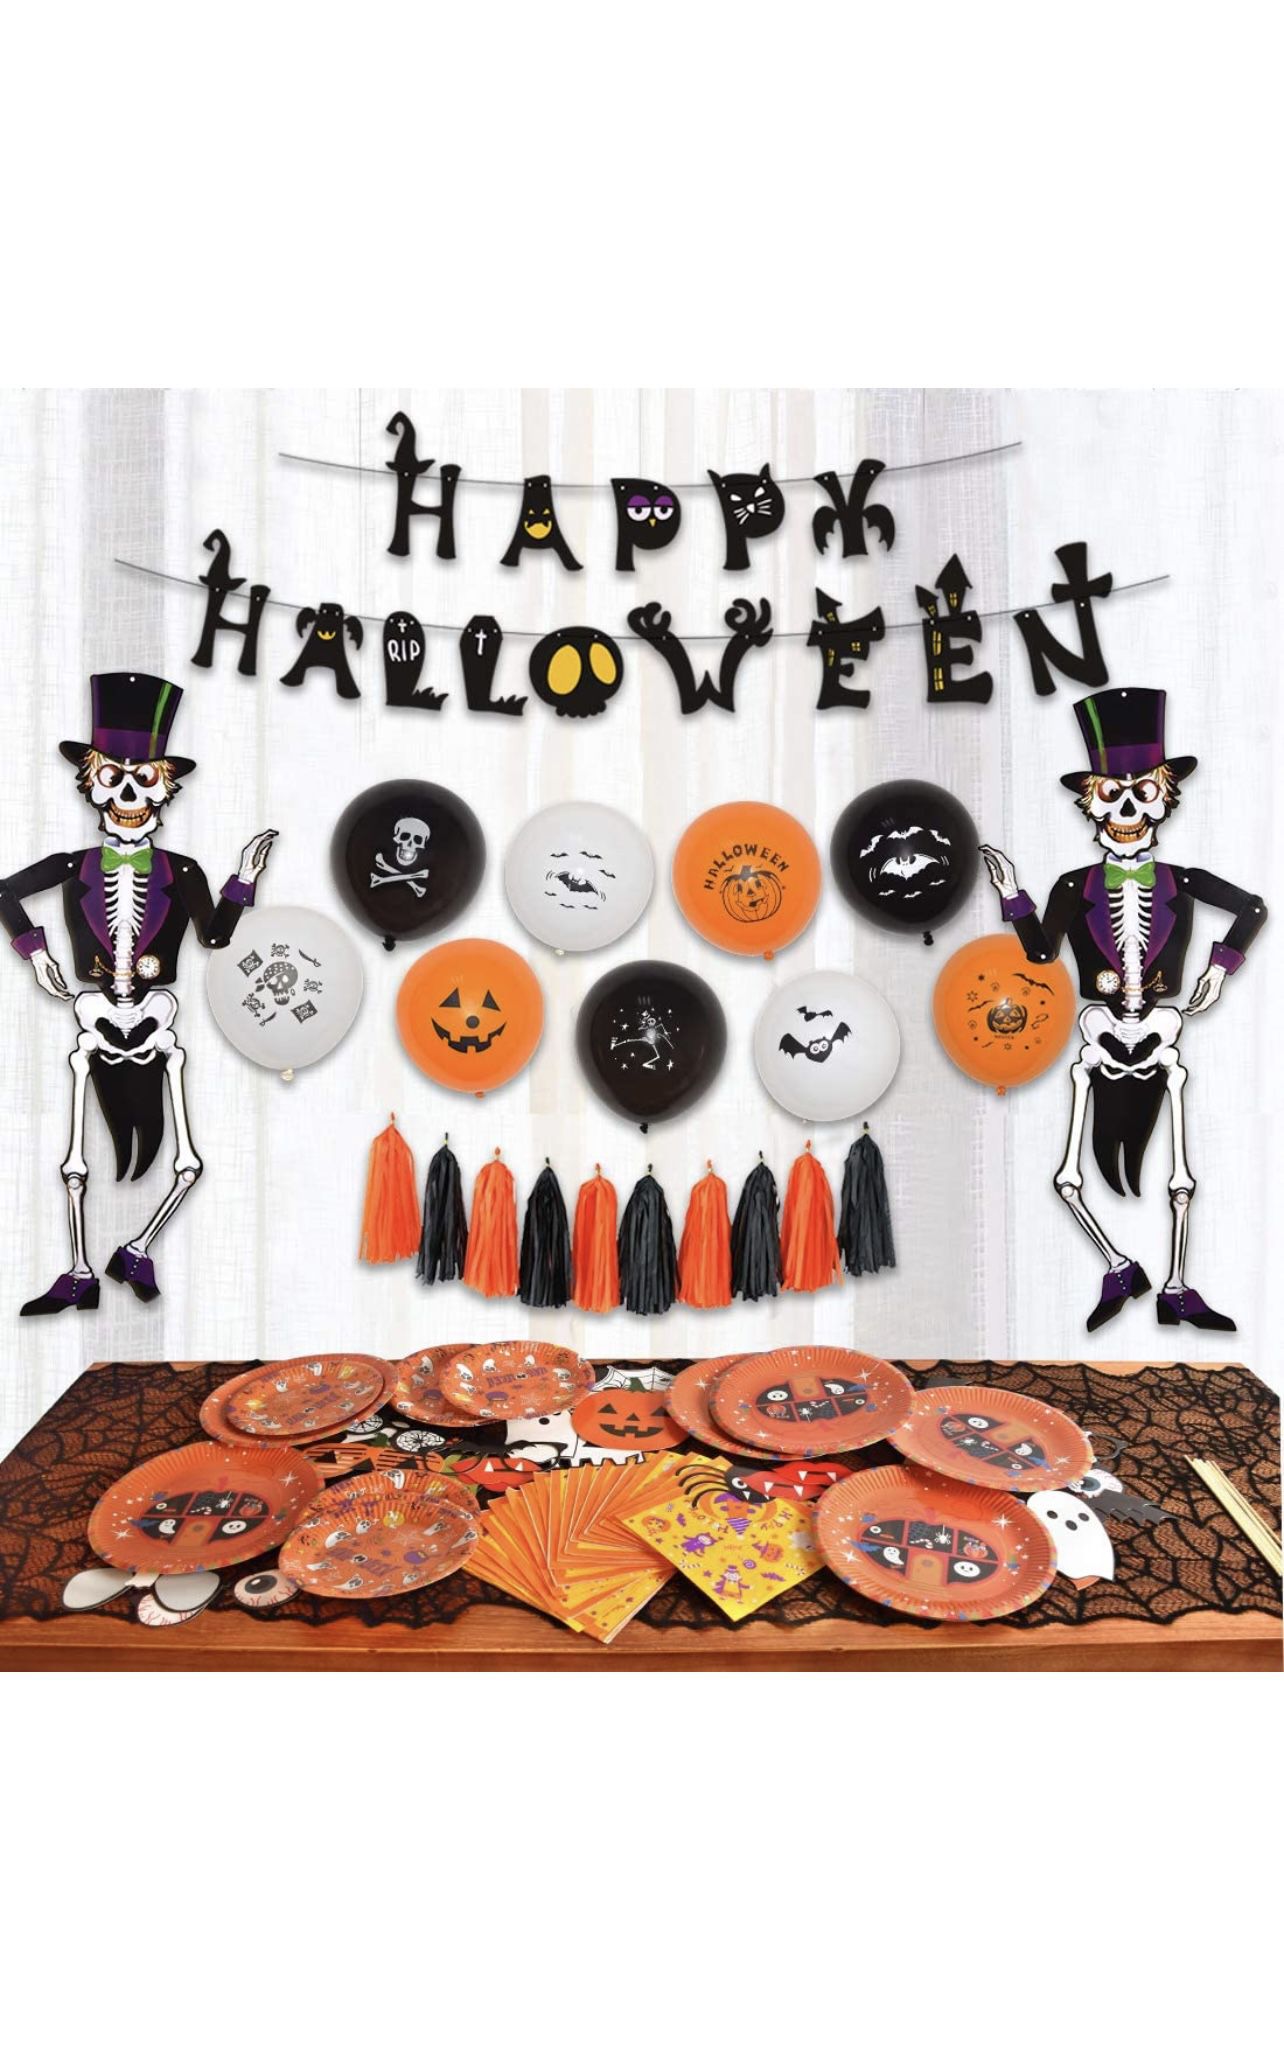 5 pcs Halloween Party Supplies Fun Party Favor Decorations, Large Pack of Hanging Skeleton Props, Photo Props, Balloons, Banner, Plates, Napkins, Tass